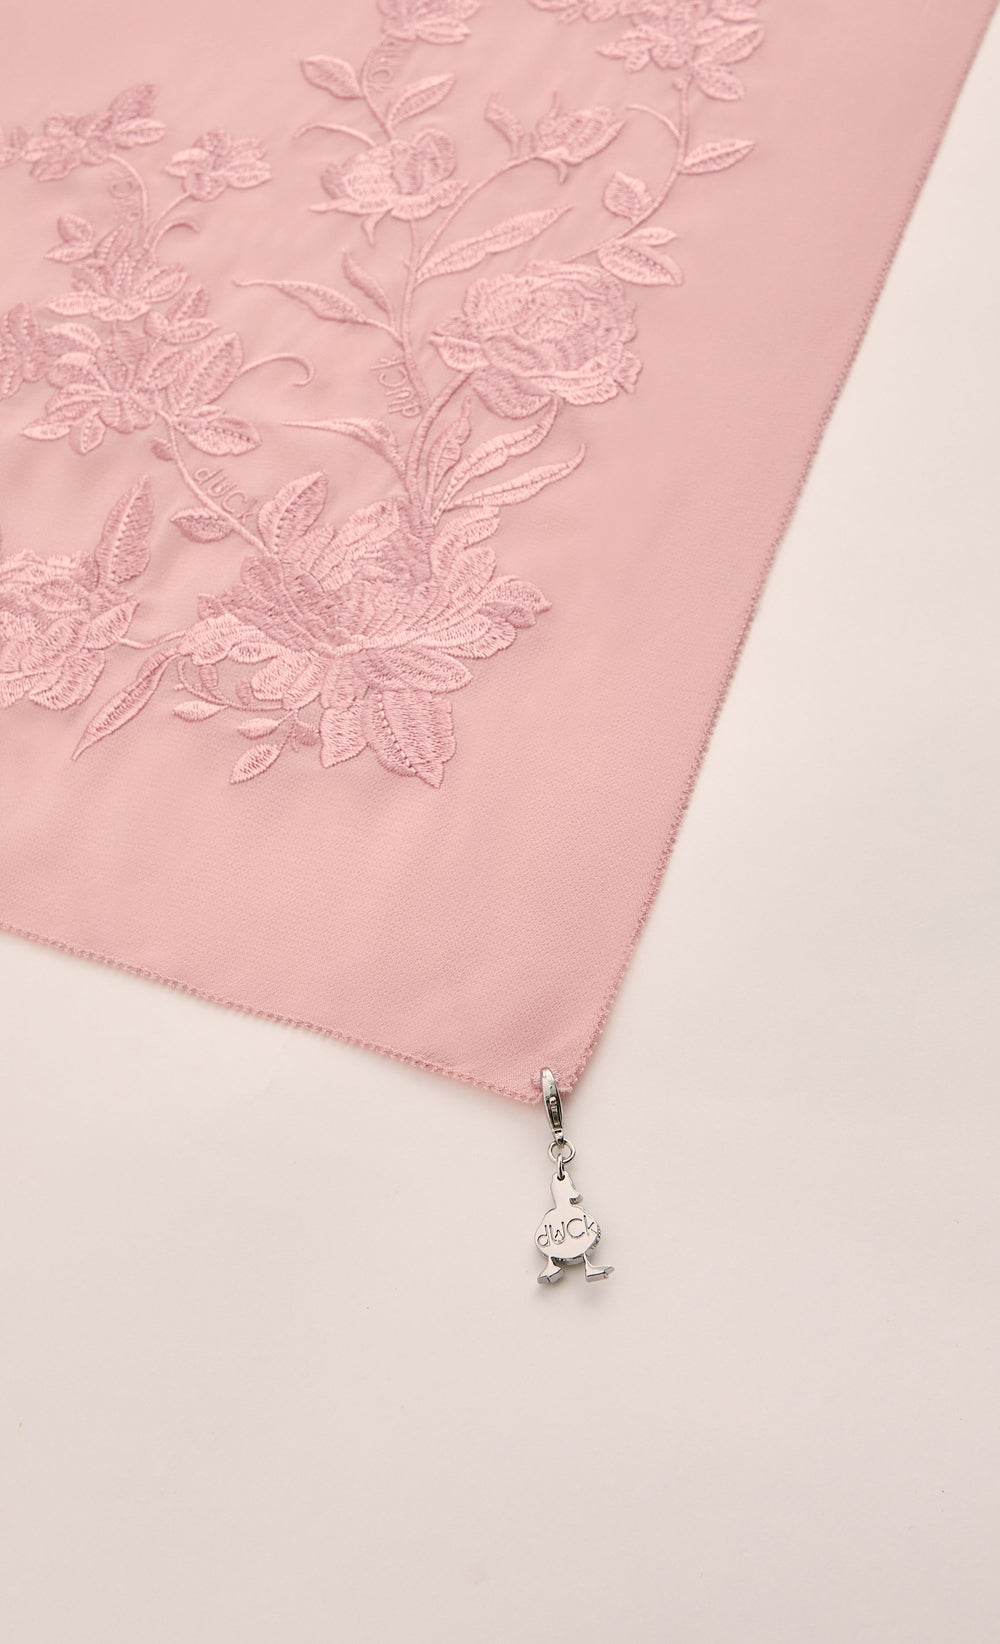 The Peonies Embroidery dUCk Shawl in Blush